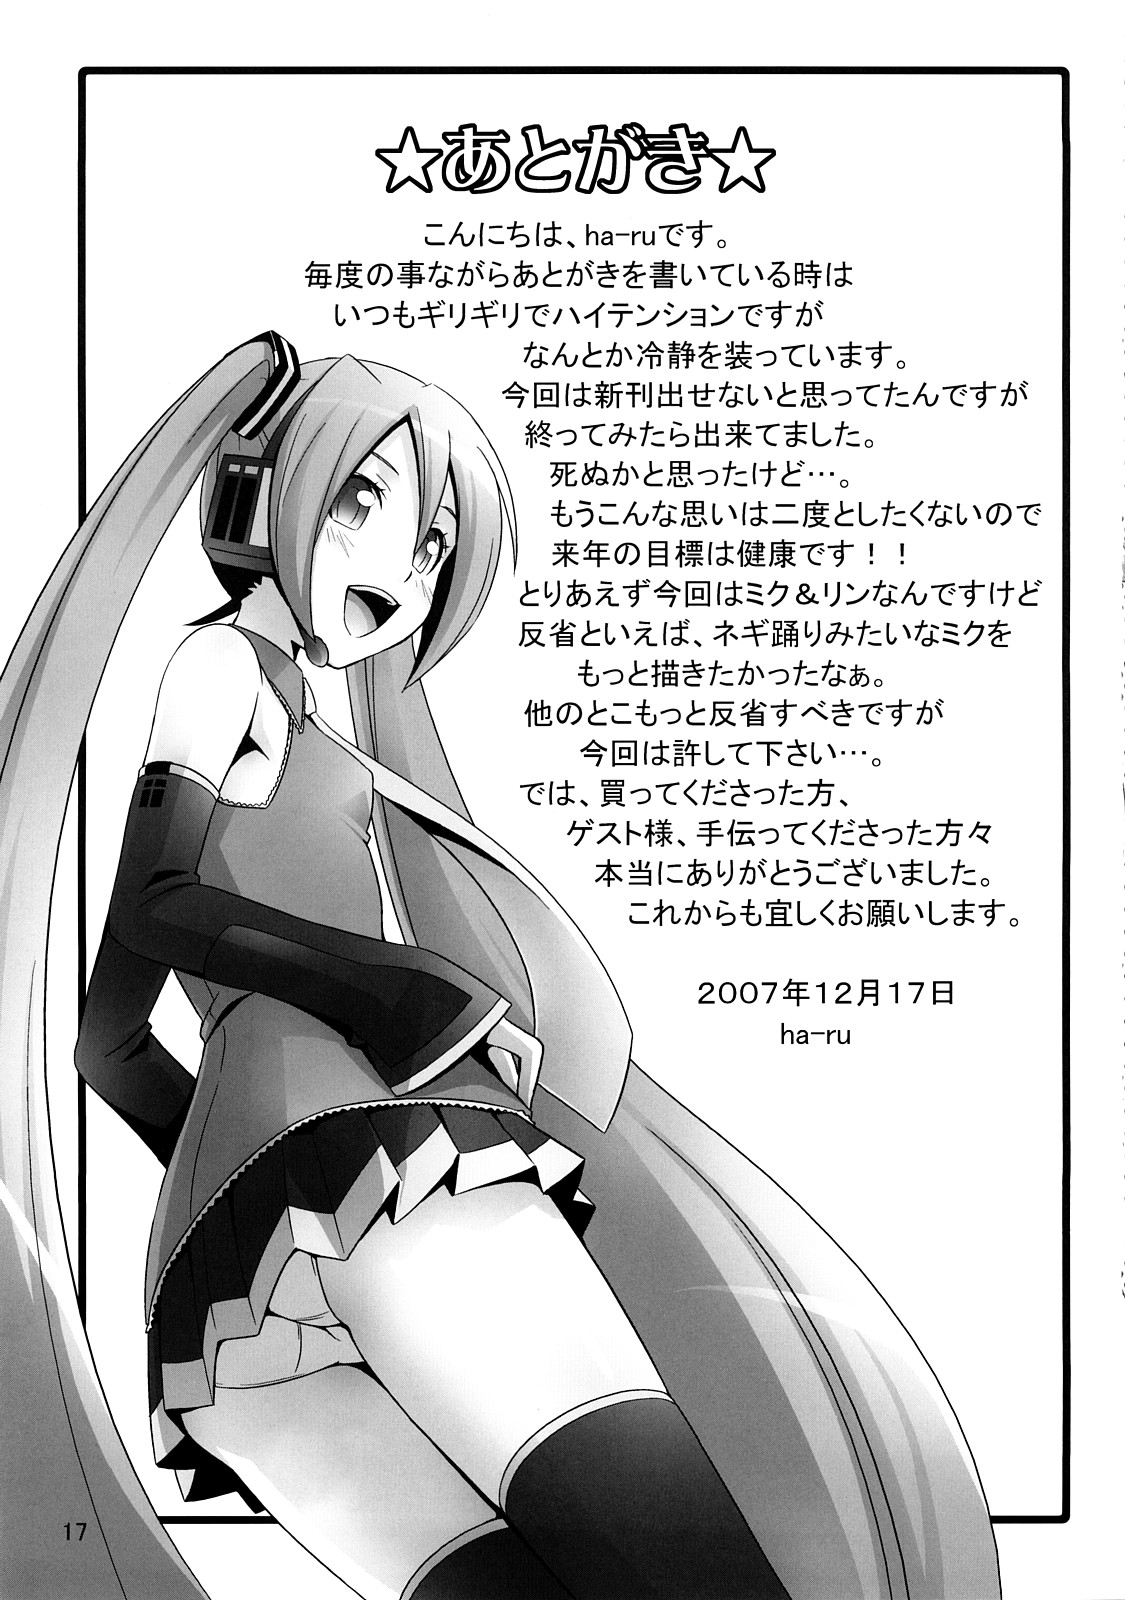 (C73) [Medical Berry (CL-55, ha-ru)] Mixture (VOCALOID2) page 16 full